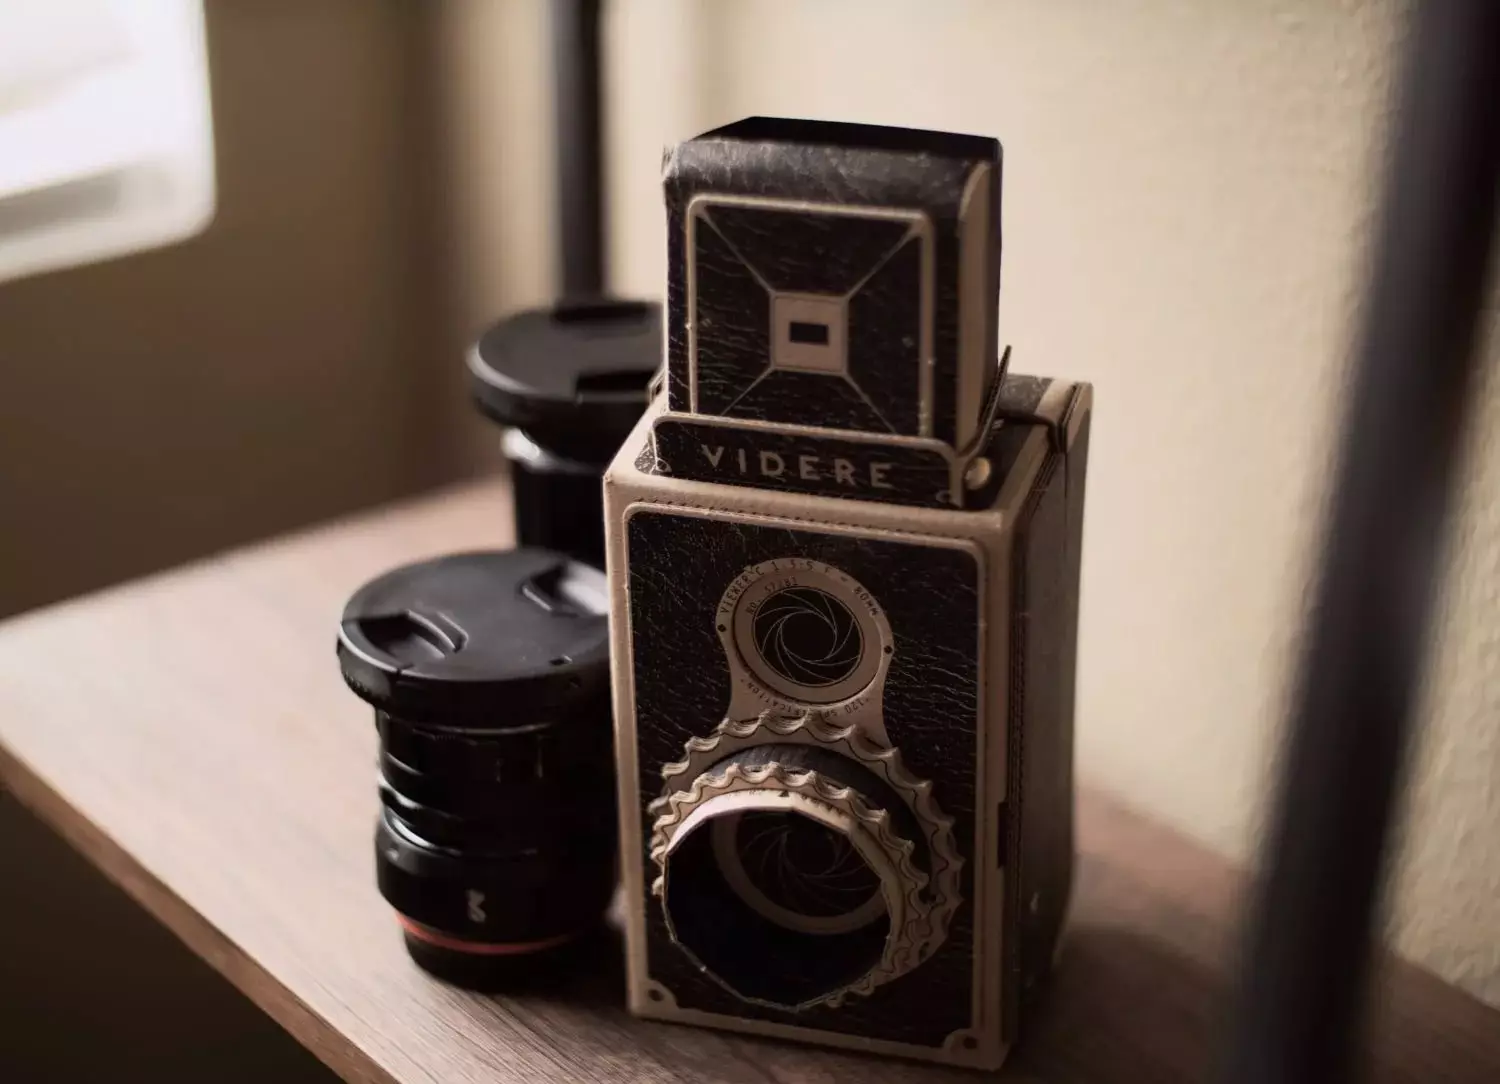 How To Find Pinhole Camera Top 3 Simple Ways (2022)